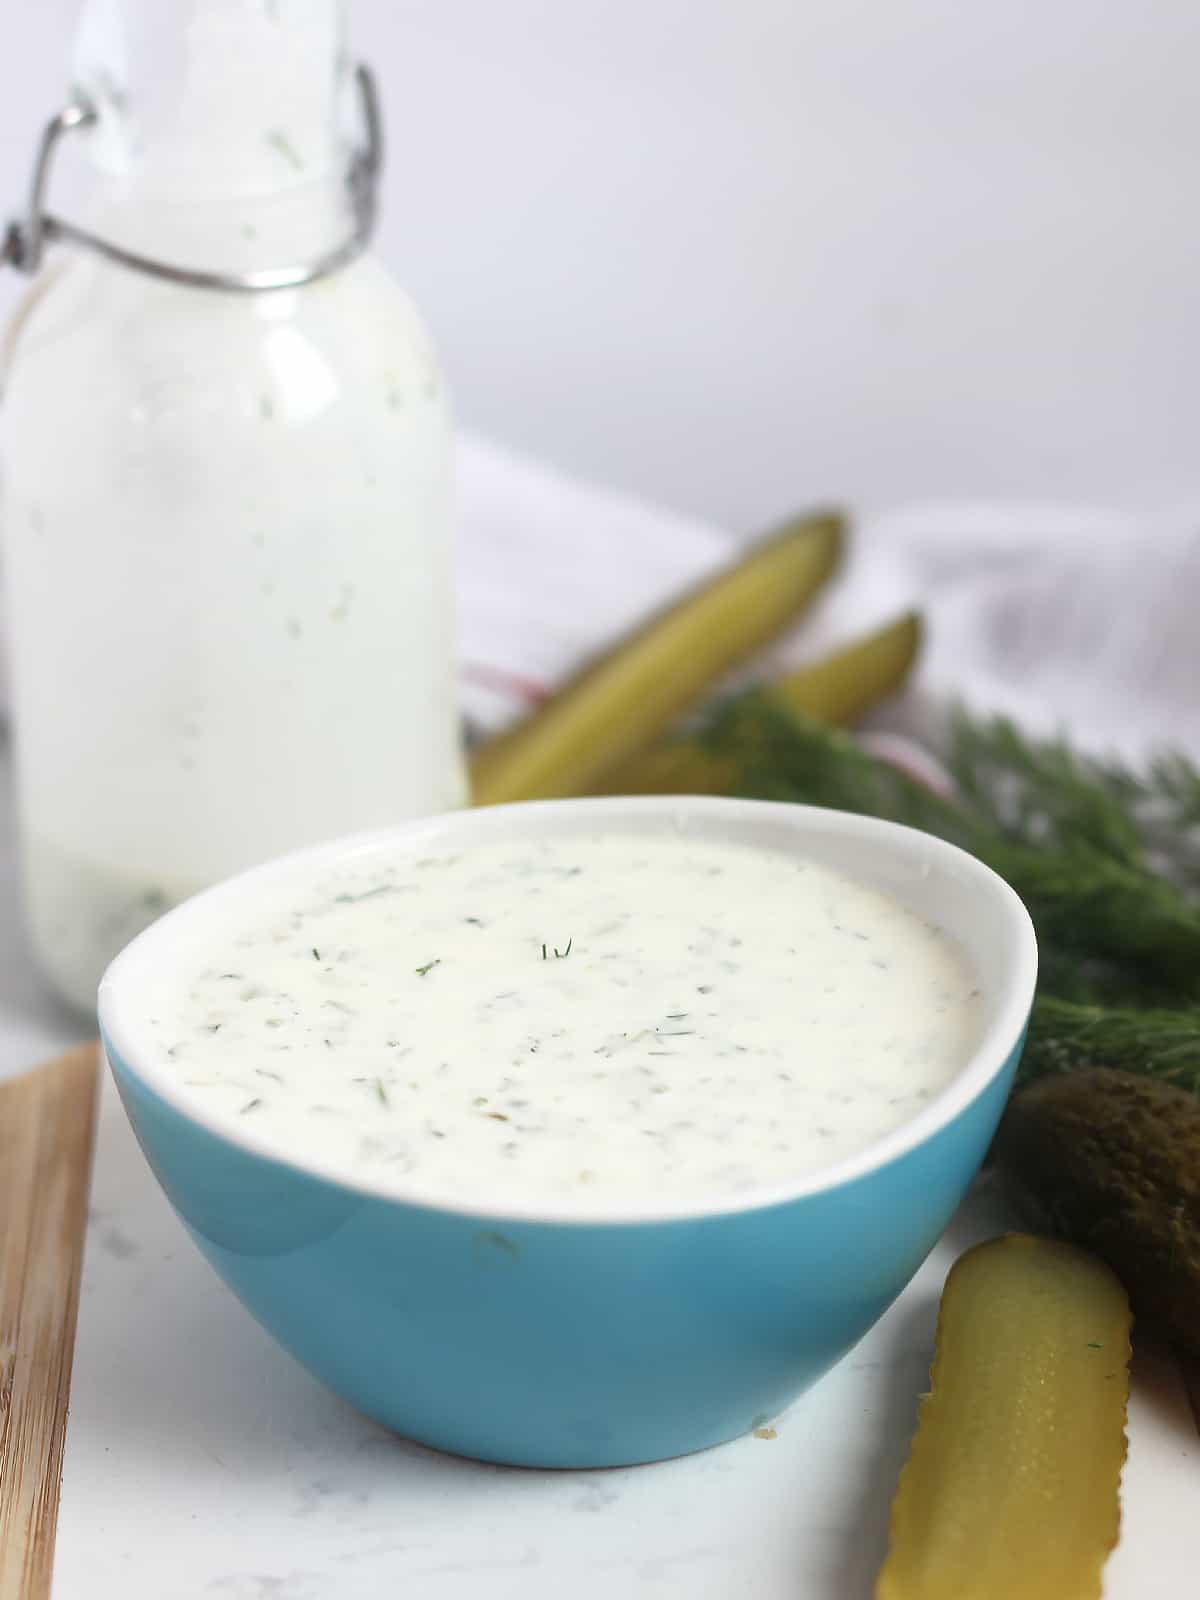 Dill pickle dip in a small blue bowl.